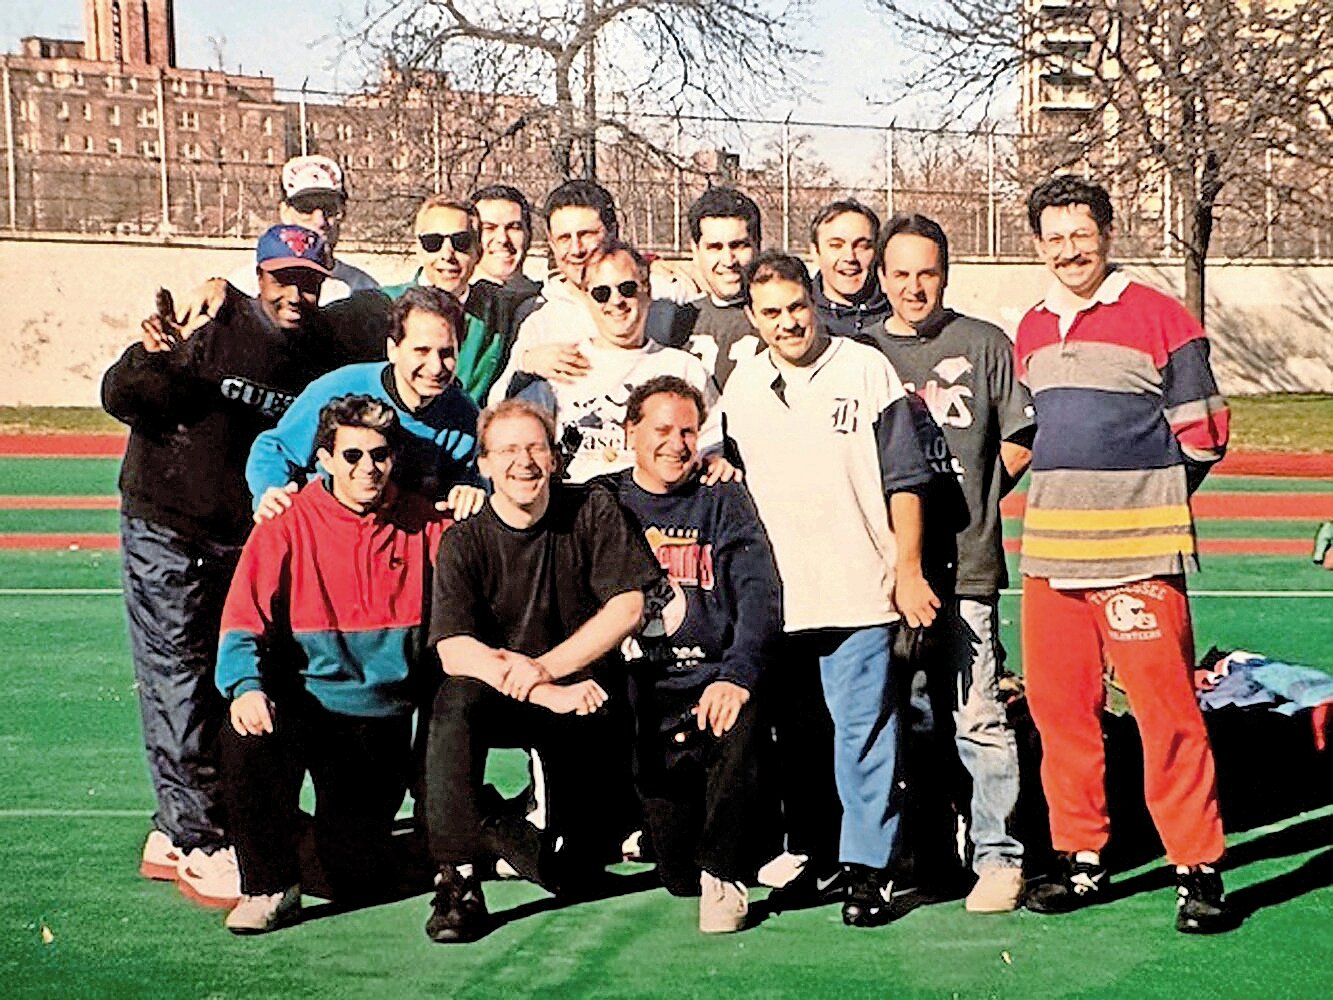 Members of the earlier iterations of the Turkey Bowl in northwest Bronx pose for a team photo. The games started out in 1974 with a 4 on 4 format and have grown to about 20 or so players, including later generations of the original players.